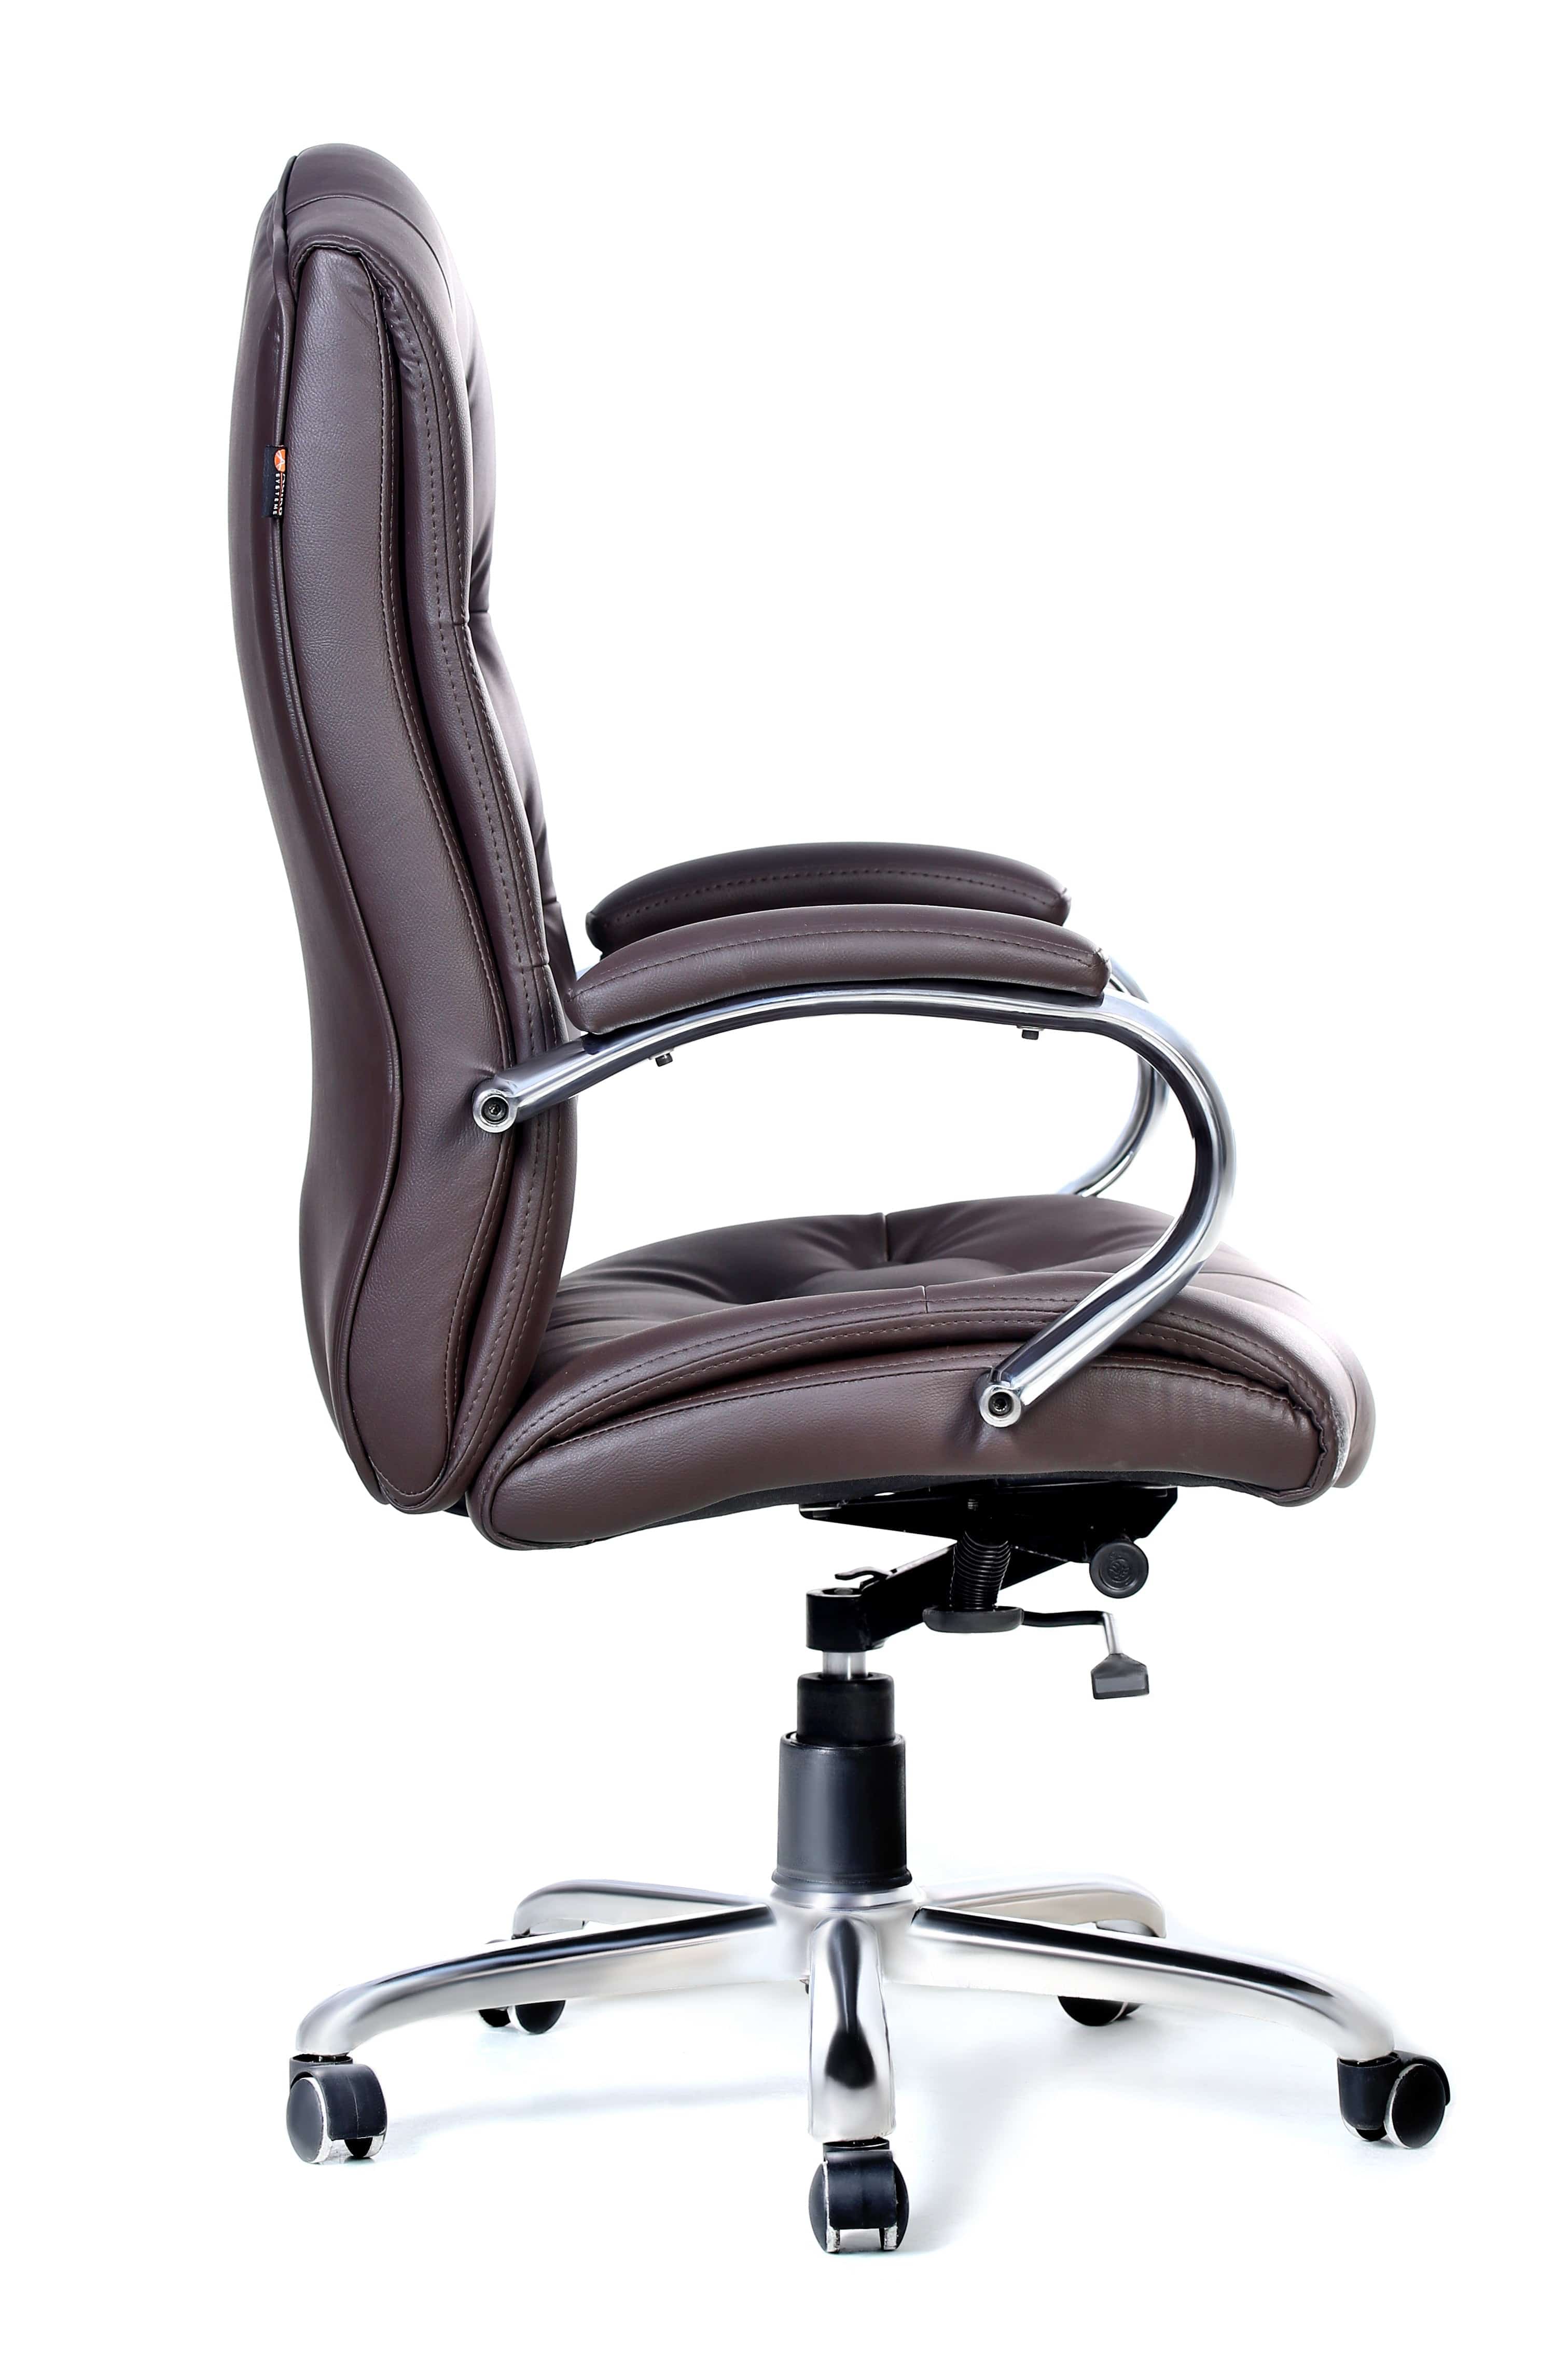 Adiko Classic Executive Revolving Office Chair in Brown